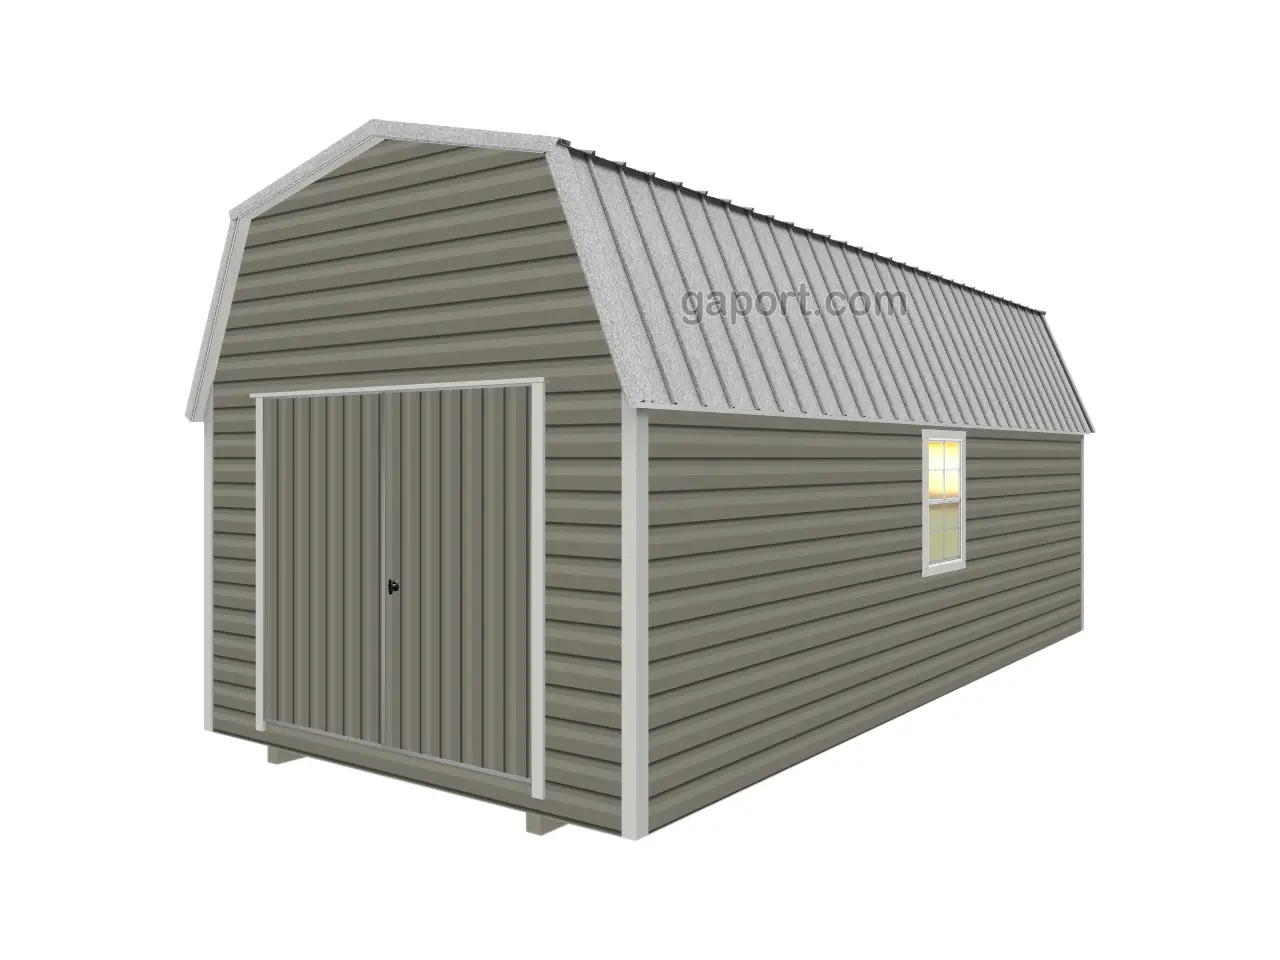 This great tool shed gives you space for seasonal items in the loft to maximize space.